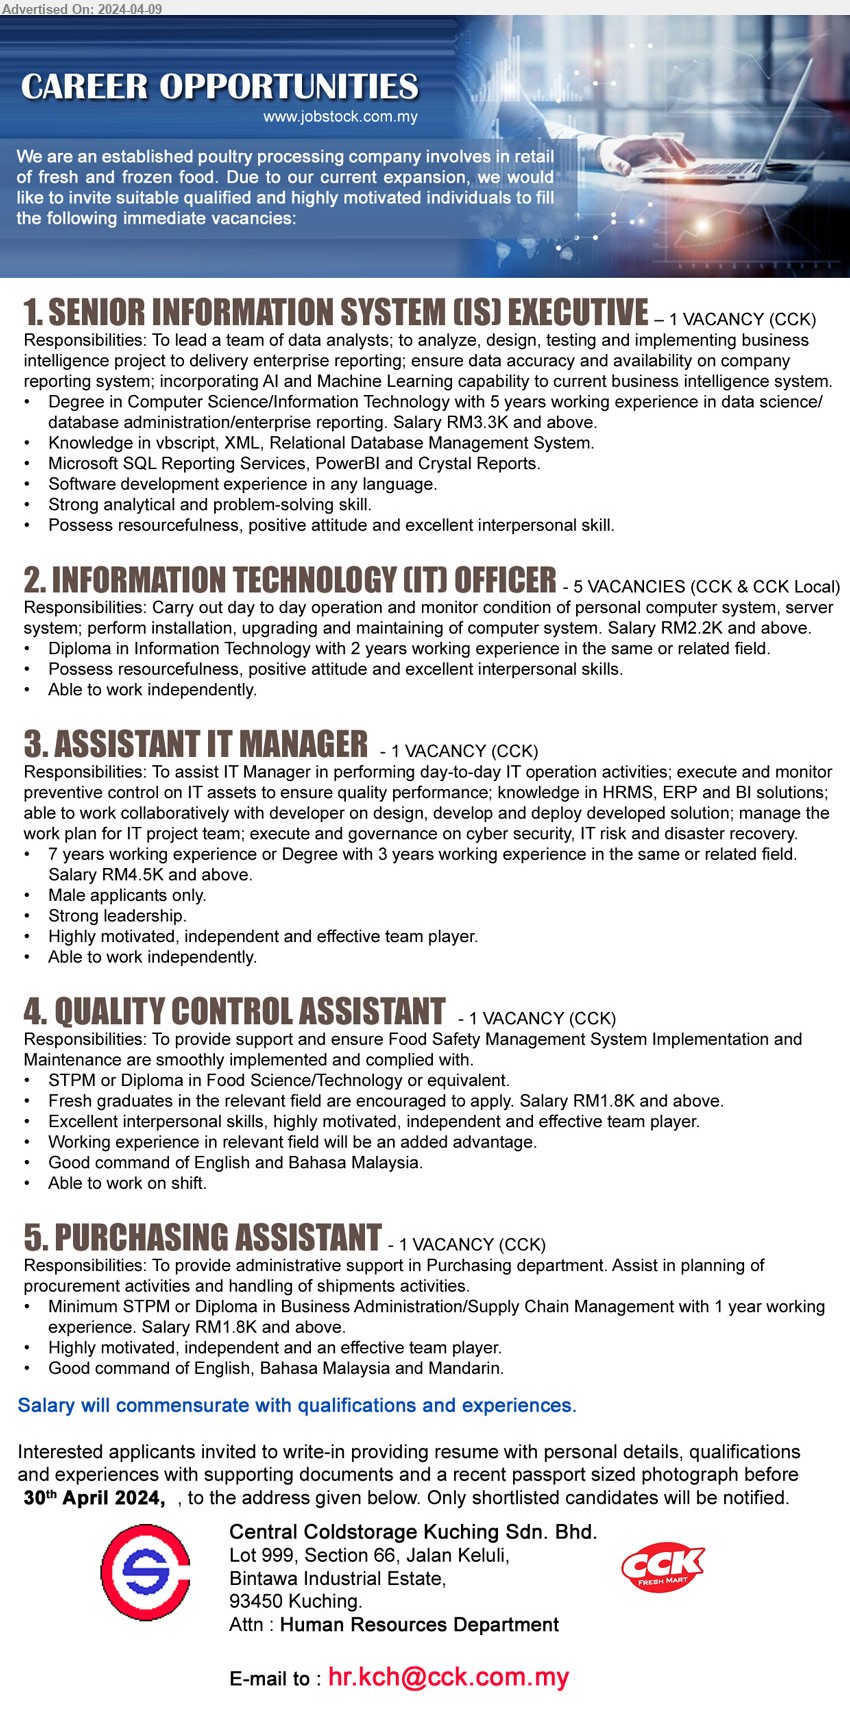 CENTRAL COLDSTORAGE KUCHING SDN BHD - 1. SENIOR INFORMATION SYSTEM (IS) EXECUTIVE  (Kuching), Degree in Computer Science/Information Technology with 5 years working experience in data science/database administration/enterprise reporting. Salary RM3.3K,...
2. INFORMATION TECHNOLOGY (IT) OFFICER  (Kuching), Diploma in Information Technology with 2 years working experience, Salary RM2.2K...
3. ASSISTANT IT MANAGER  (Kuching), 7 years working experience or Degree with 3 years working experience in the same or related field. Salary RM4.5K and above,...
4. QUALITY CONTROL ASSISTANT  (Kuching), STPM or Diploma in Food Science/Technology or equivalent, Fresh graduates in the relevant field are encouraged to apply. Salary RM1.8K and above,...
5. PURCHASING ASSISTANT  (Kuching), STPM or Diploma in Business Administration/Supply Chain Management with 1 year working experience. Salary RM1.8K and above,...
Email resume to ...
